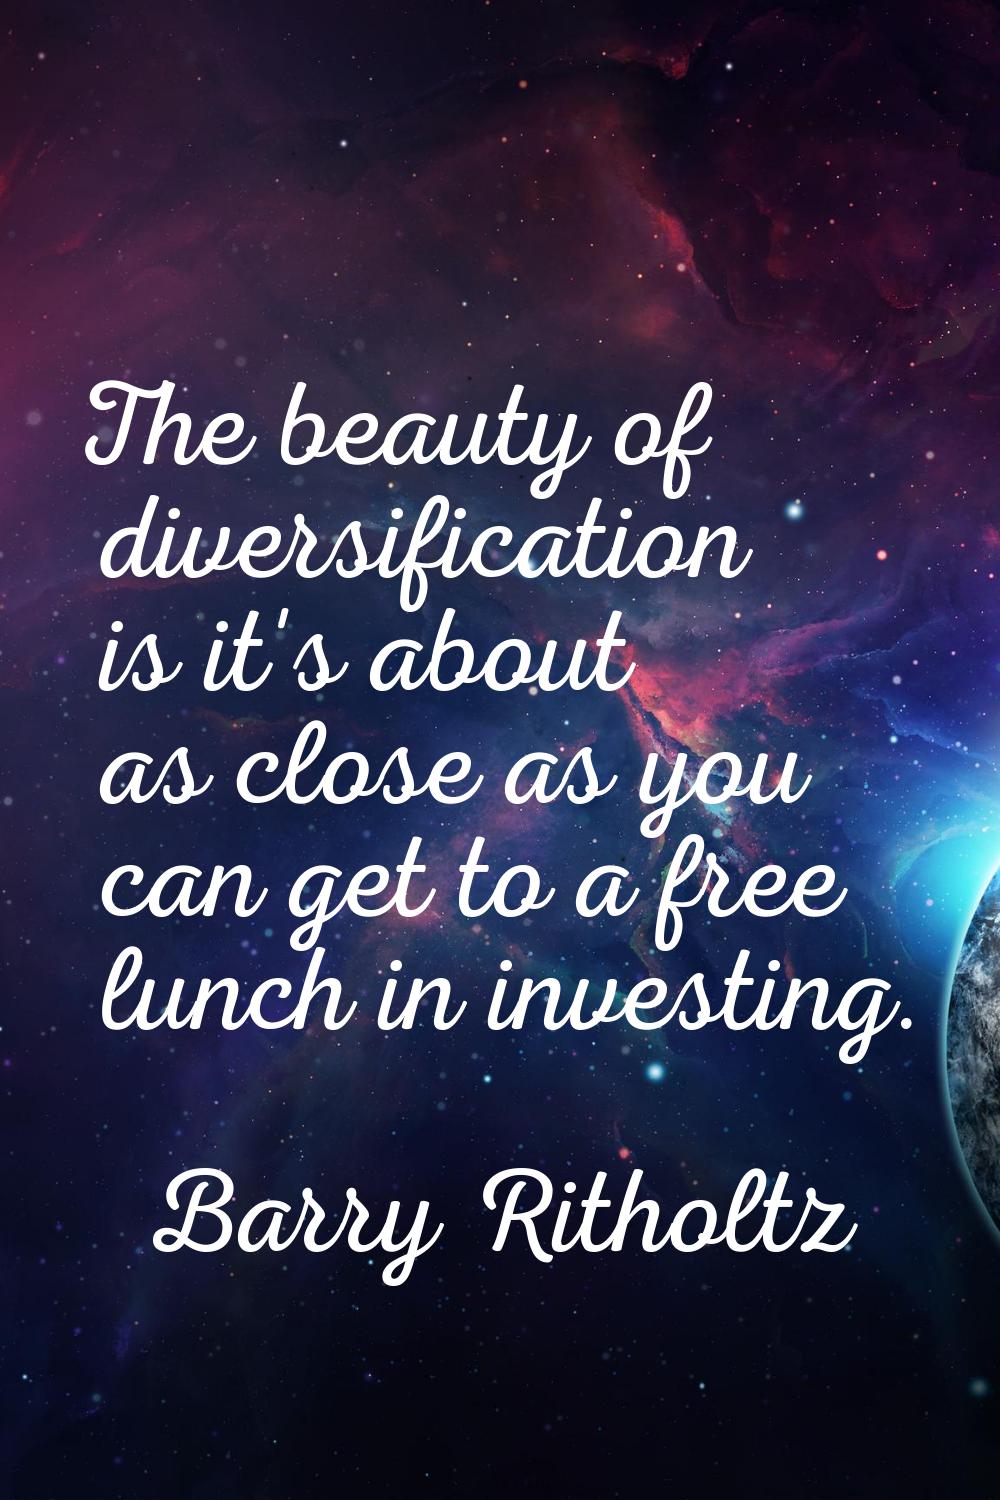 The beauty of diversification is it's about as close as you can get to a free lunch in investing.